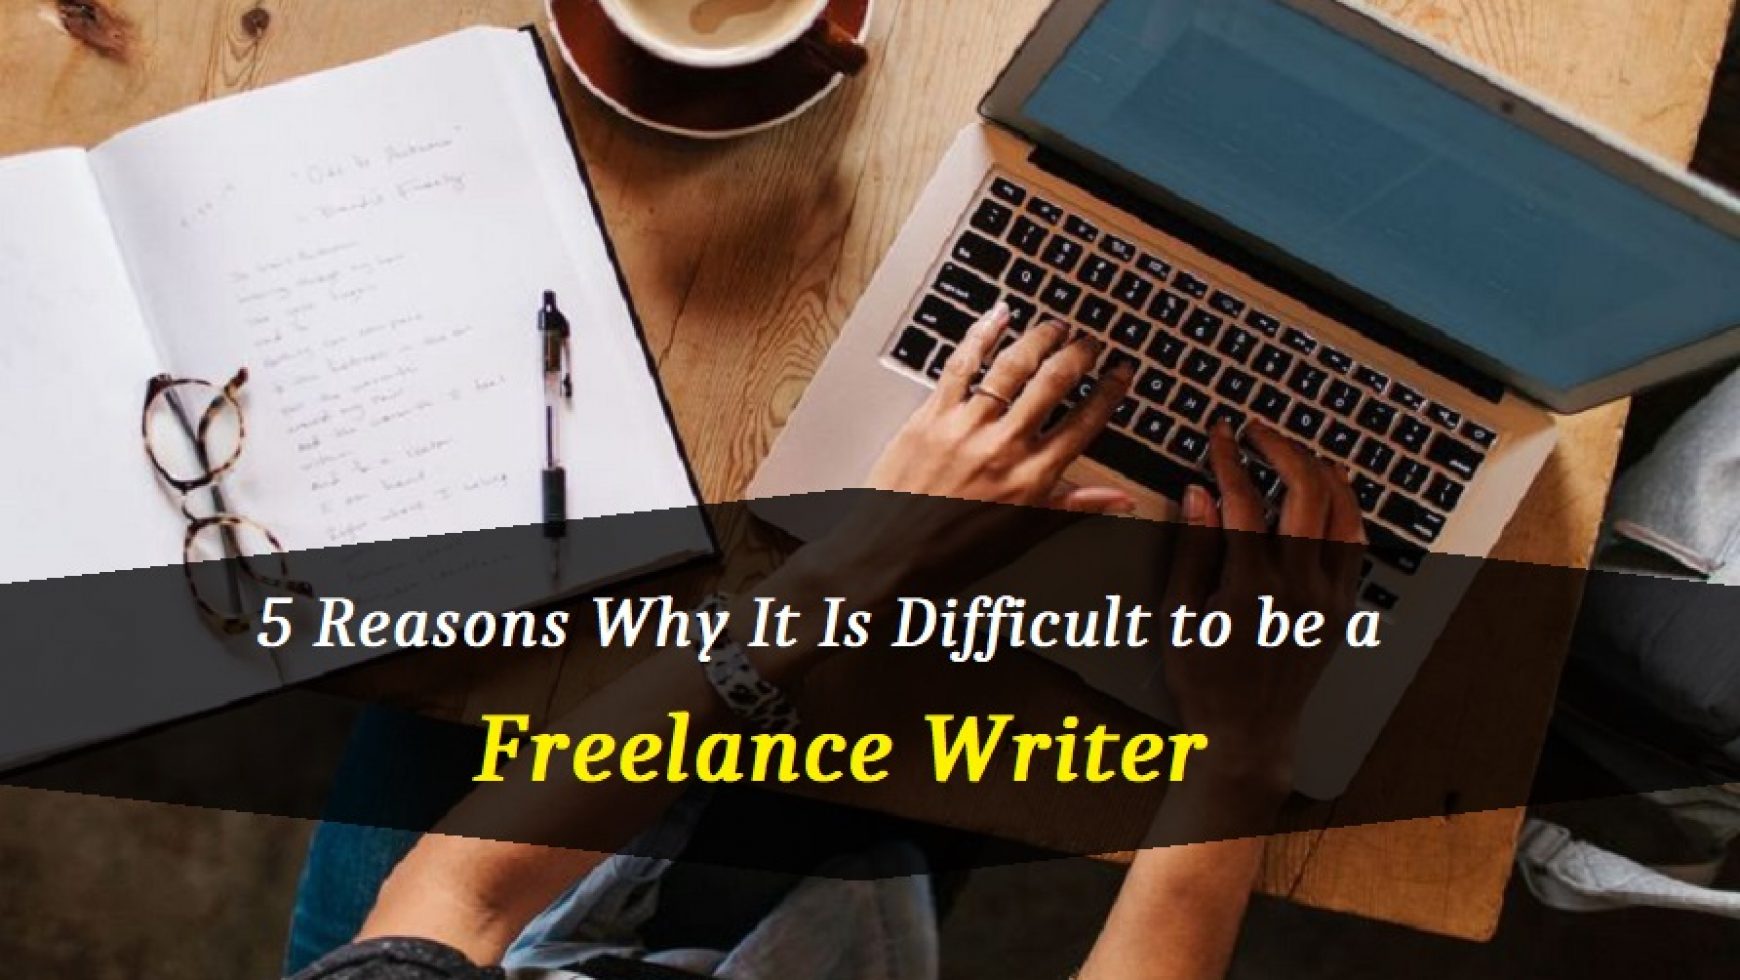 5 Reasons Why It Is Difficult to be a Freelance Writer